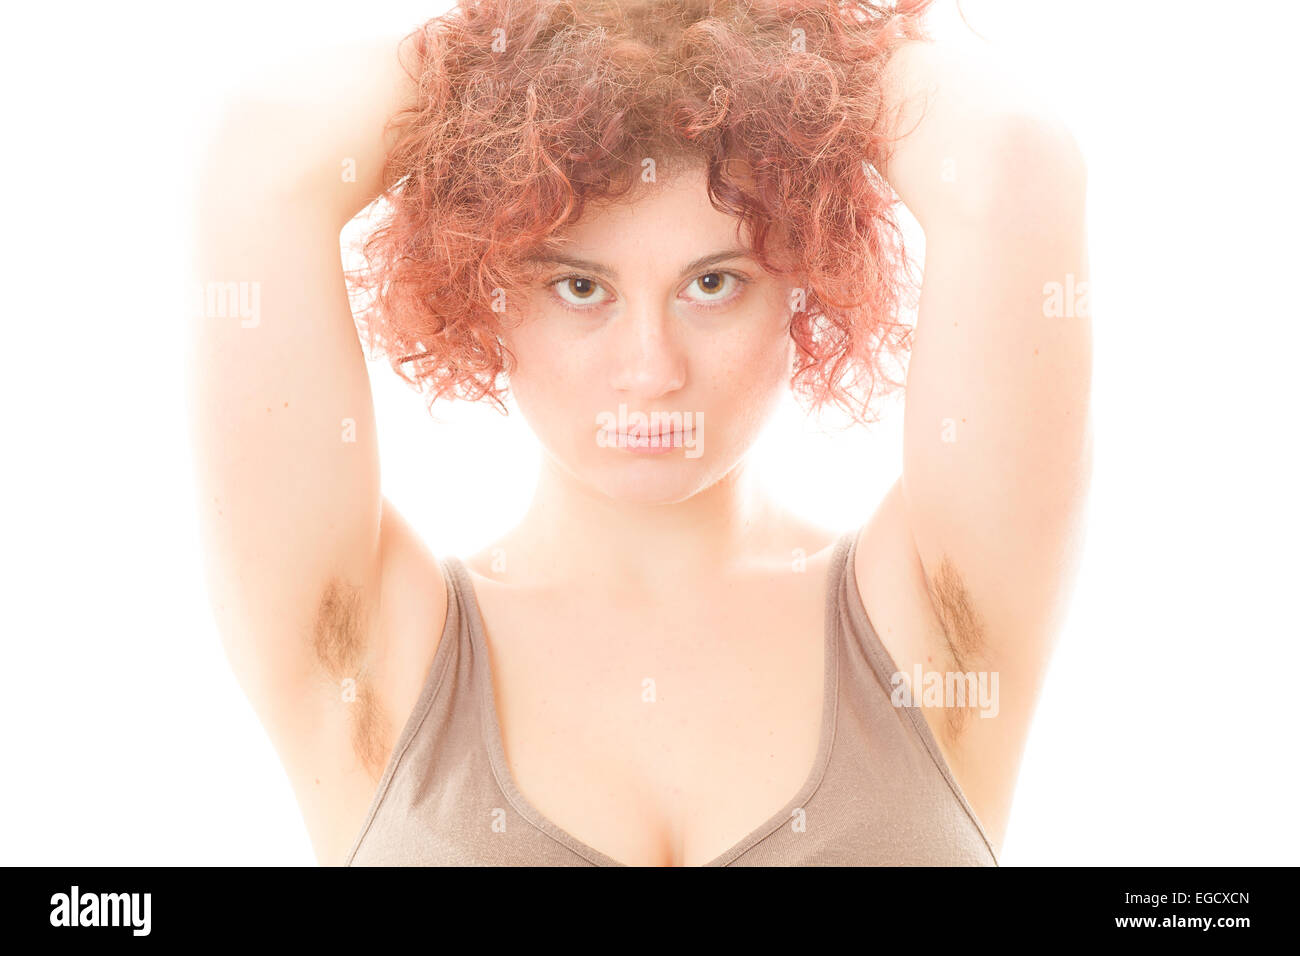 Pretty Woman with Hairy Armpits on White Background Stock Photo